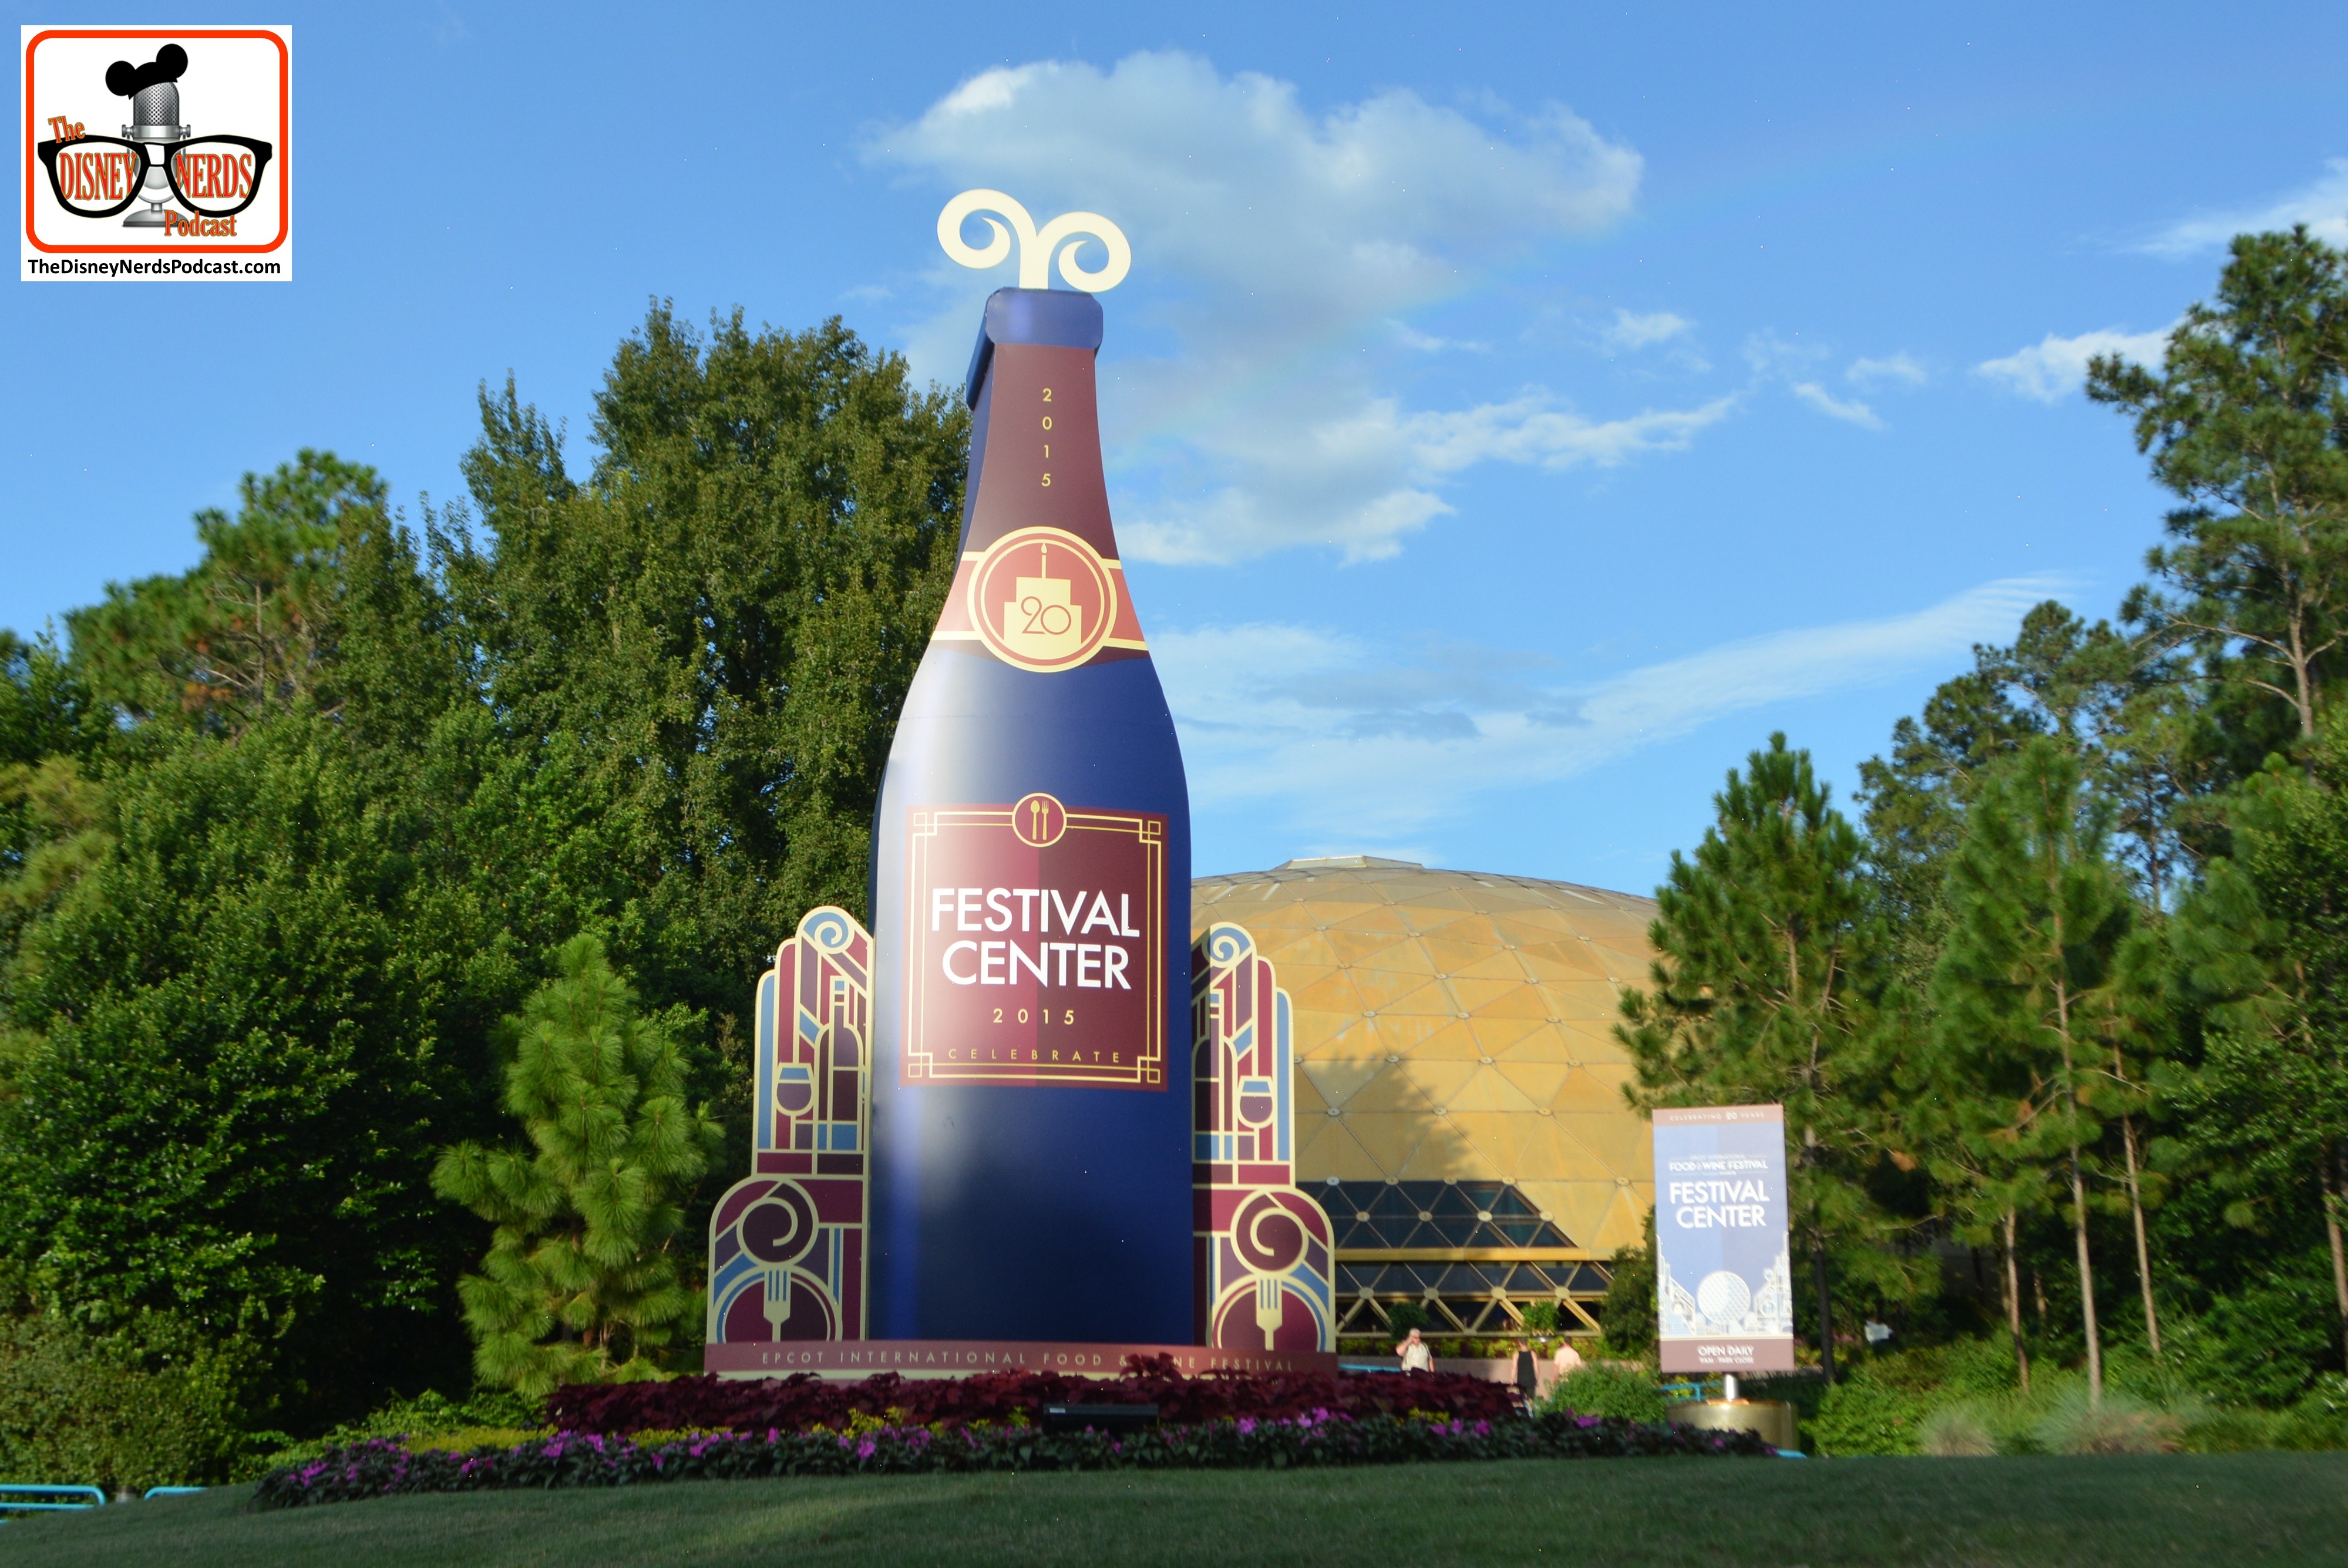 The Festival Center is home to many Food and Wine Festival Activities.